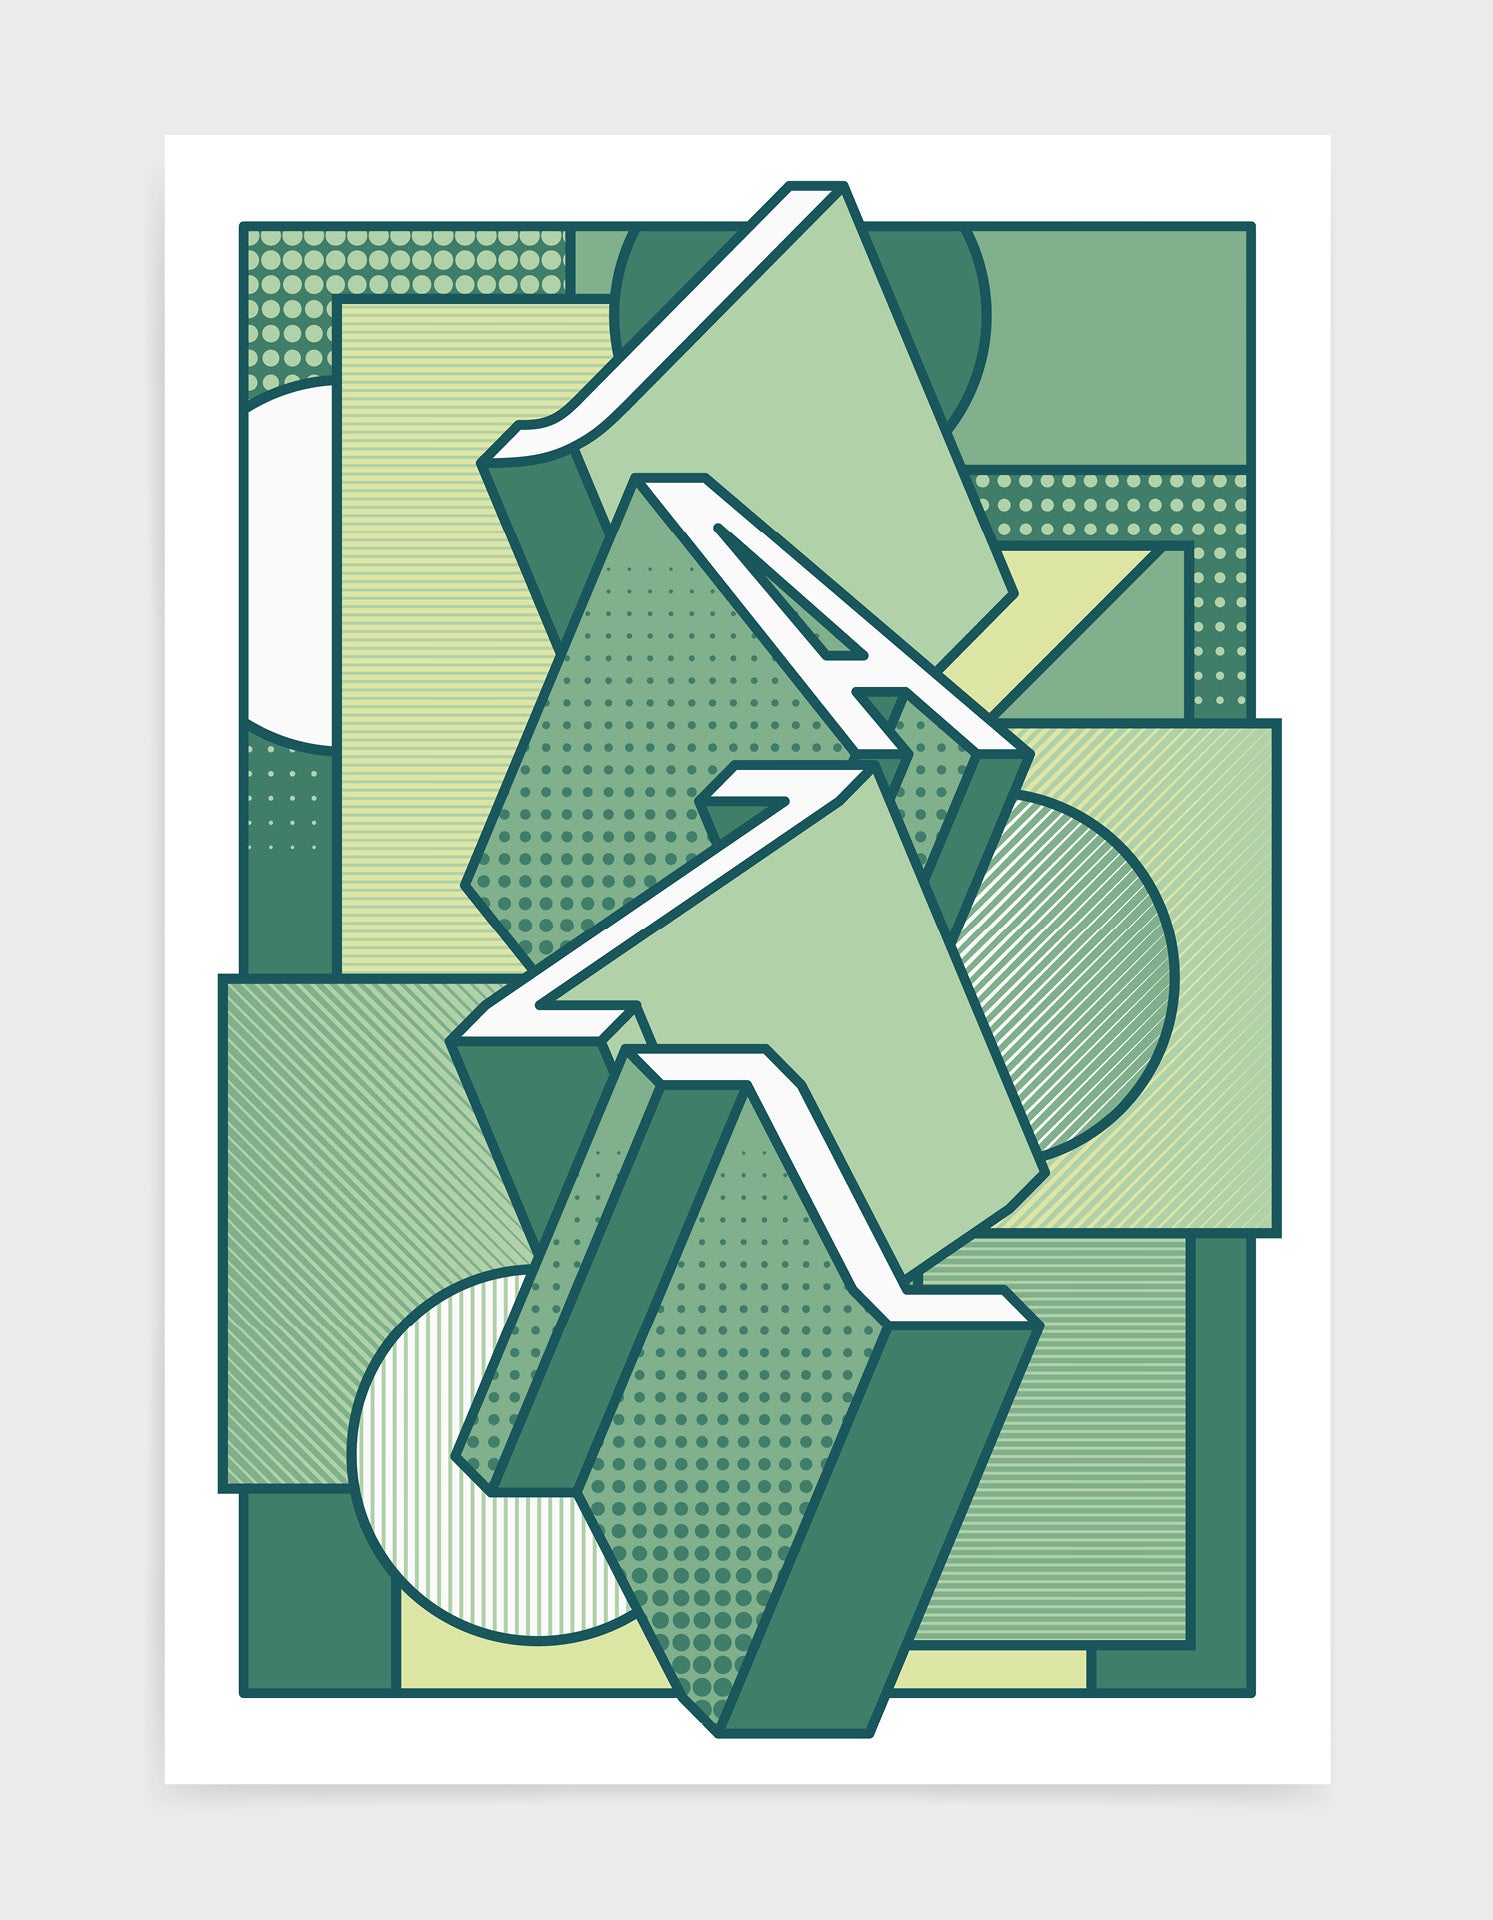 Jazz music art print featuring a geometric abstract pattern in bold shapes and green tone colours. Block typography depicts the word Jazz in tumbling text